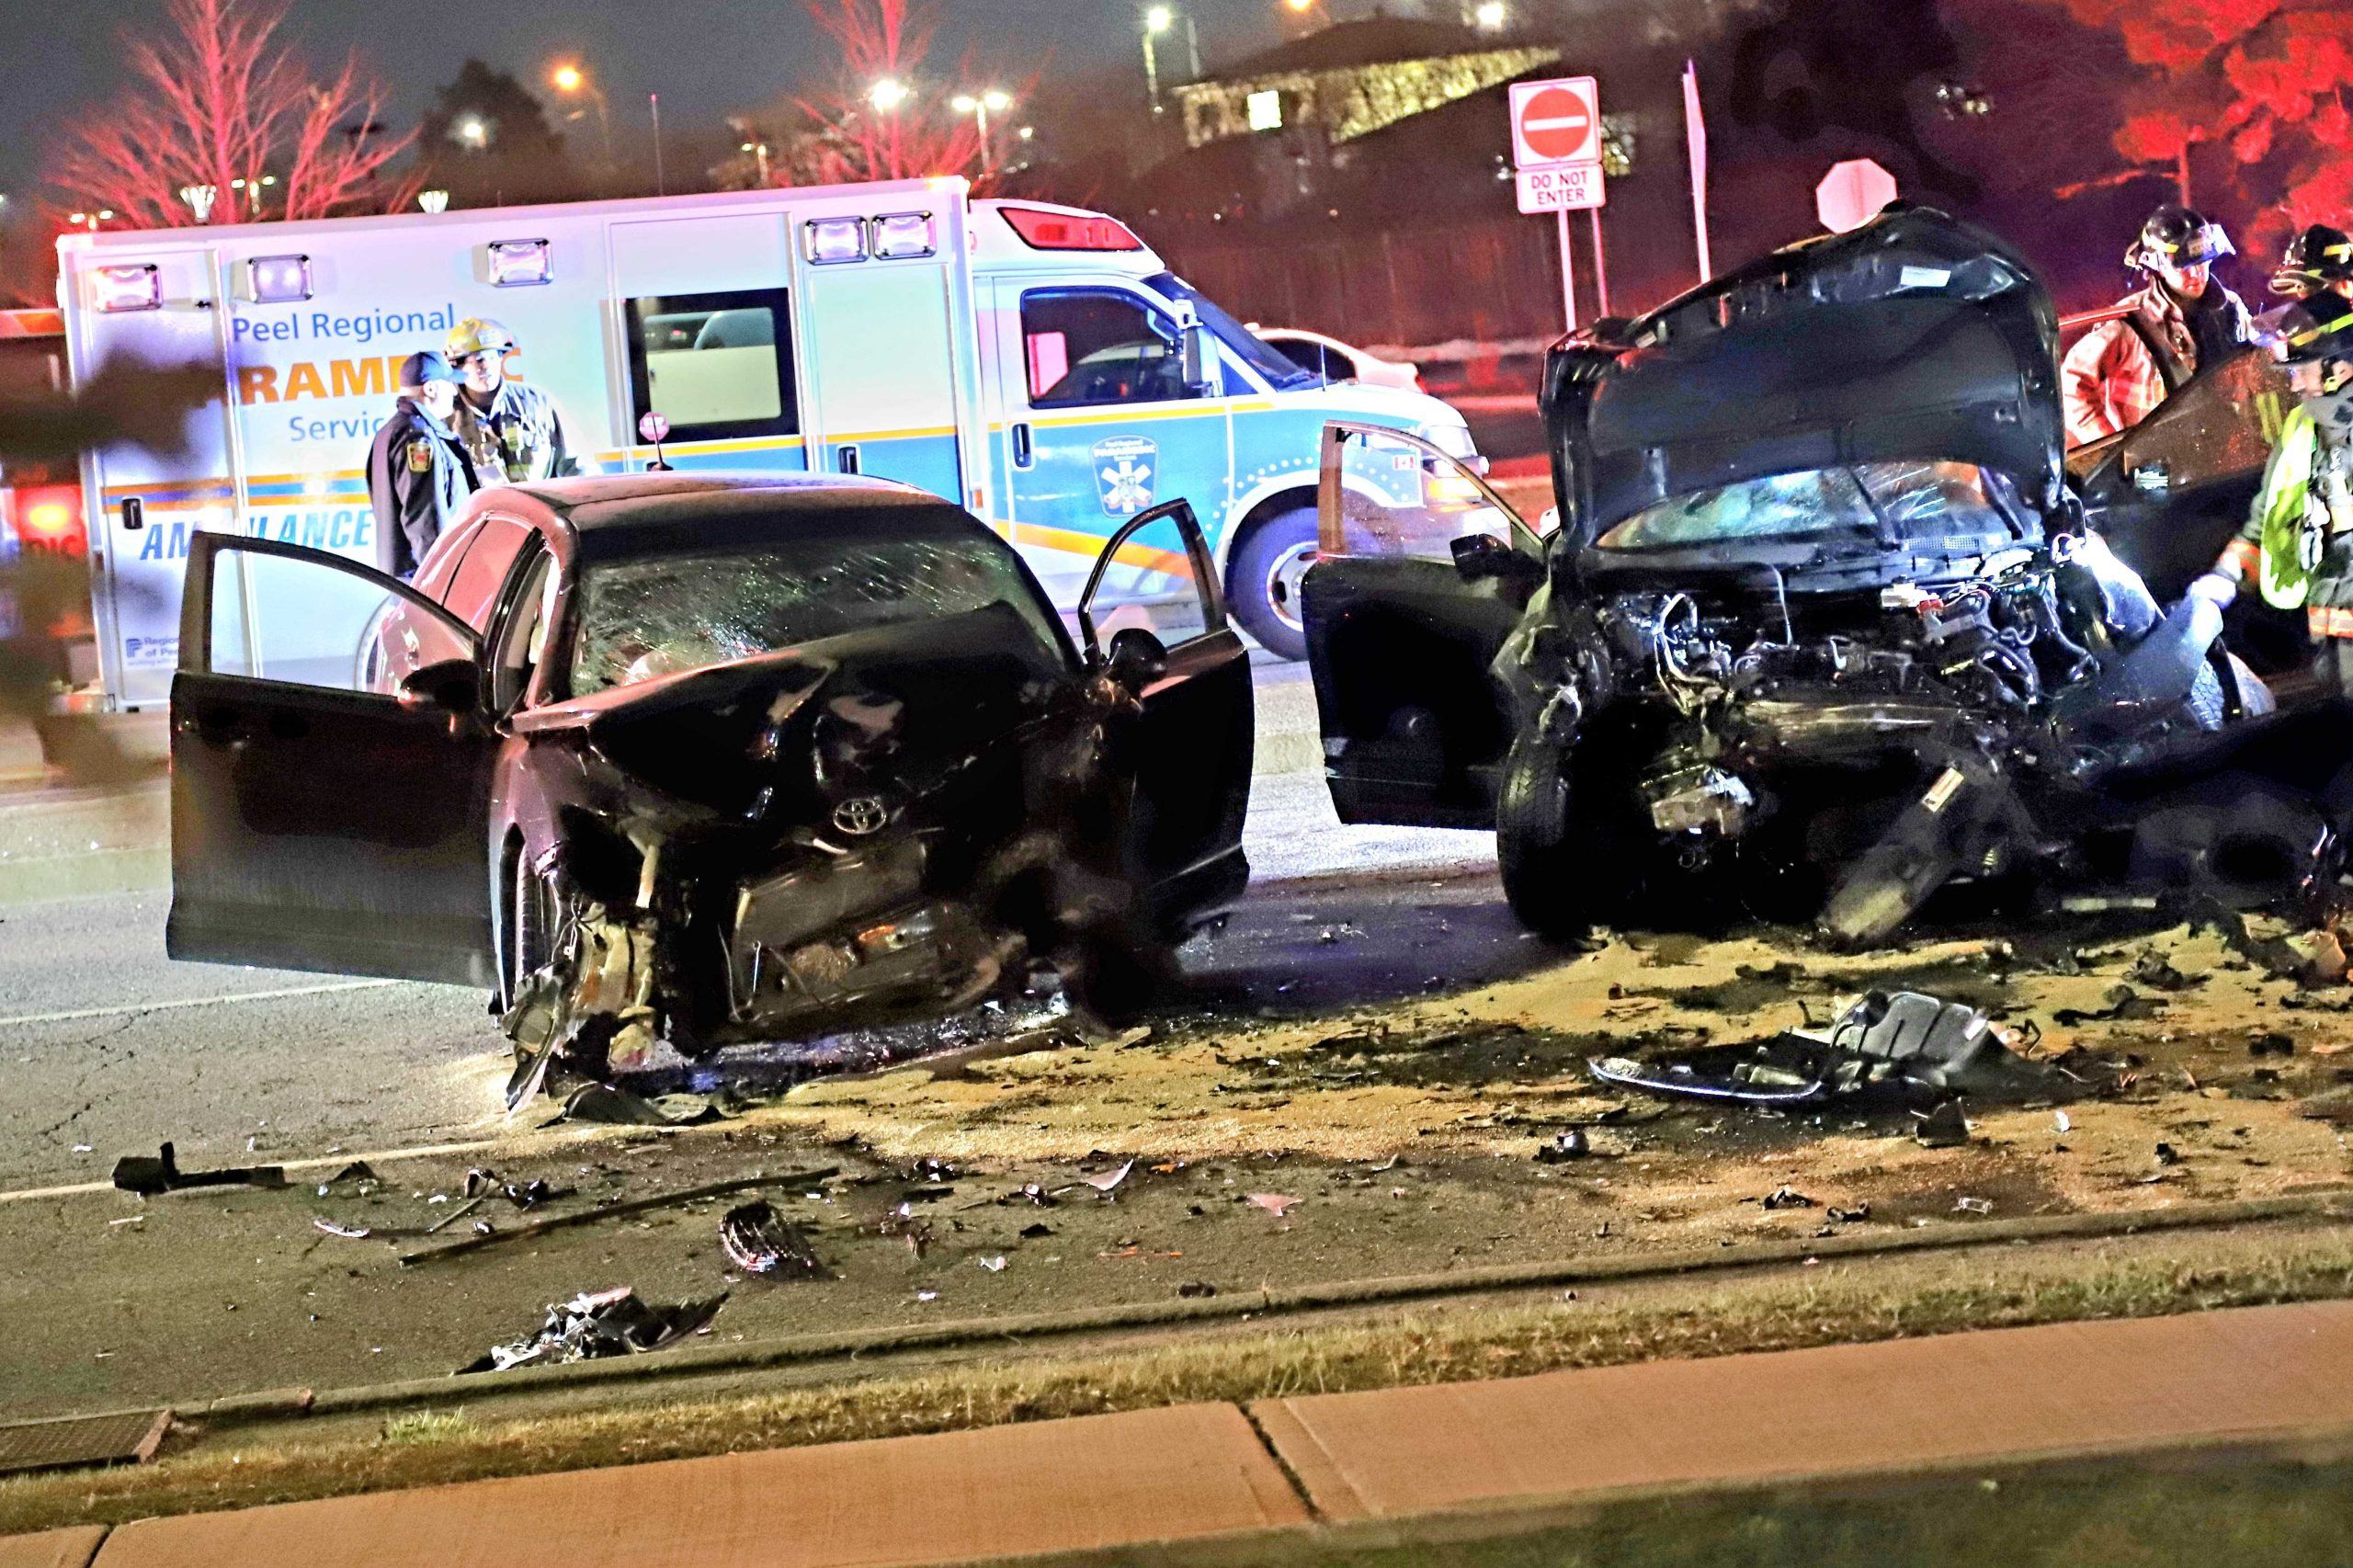 3 car accident sends several to hospital, closes major streets in Mississauga